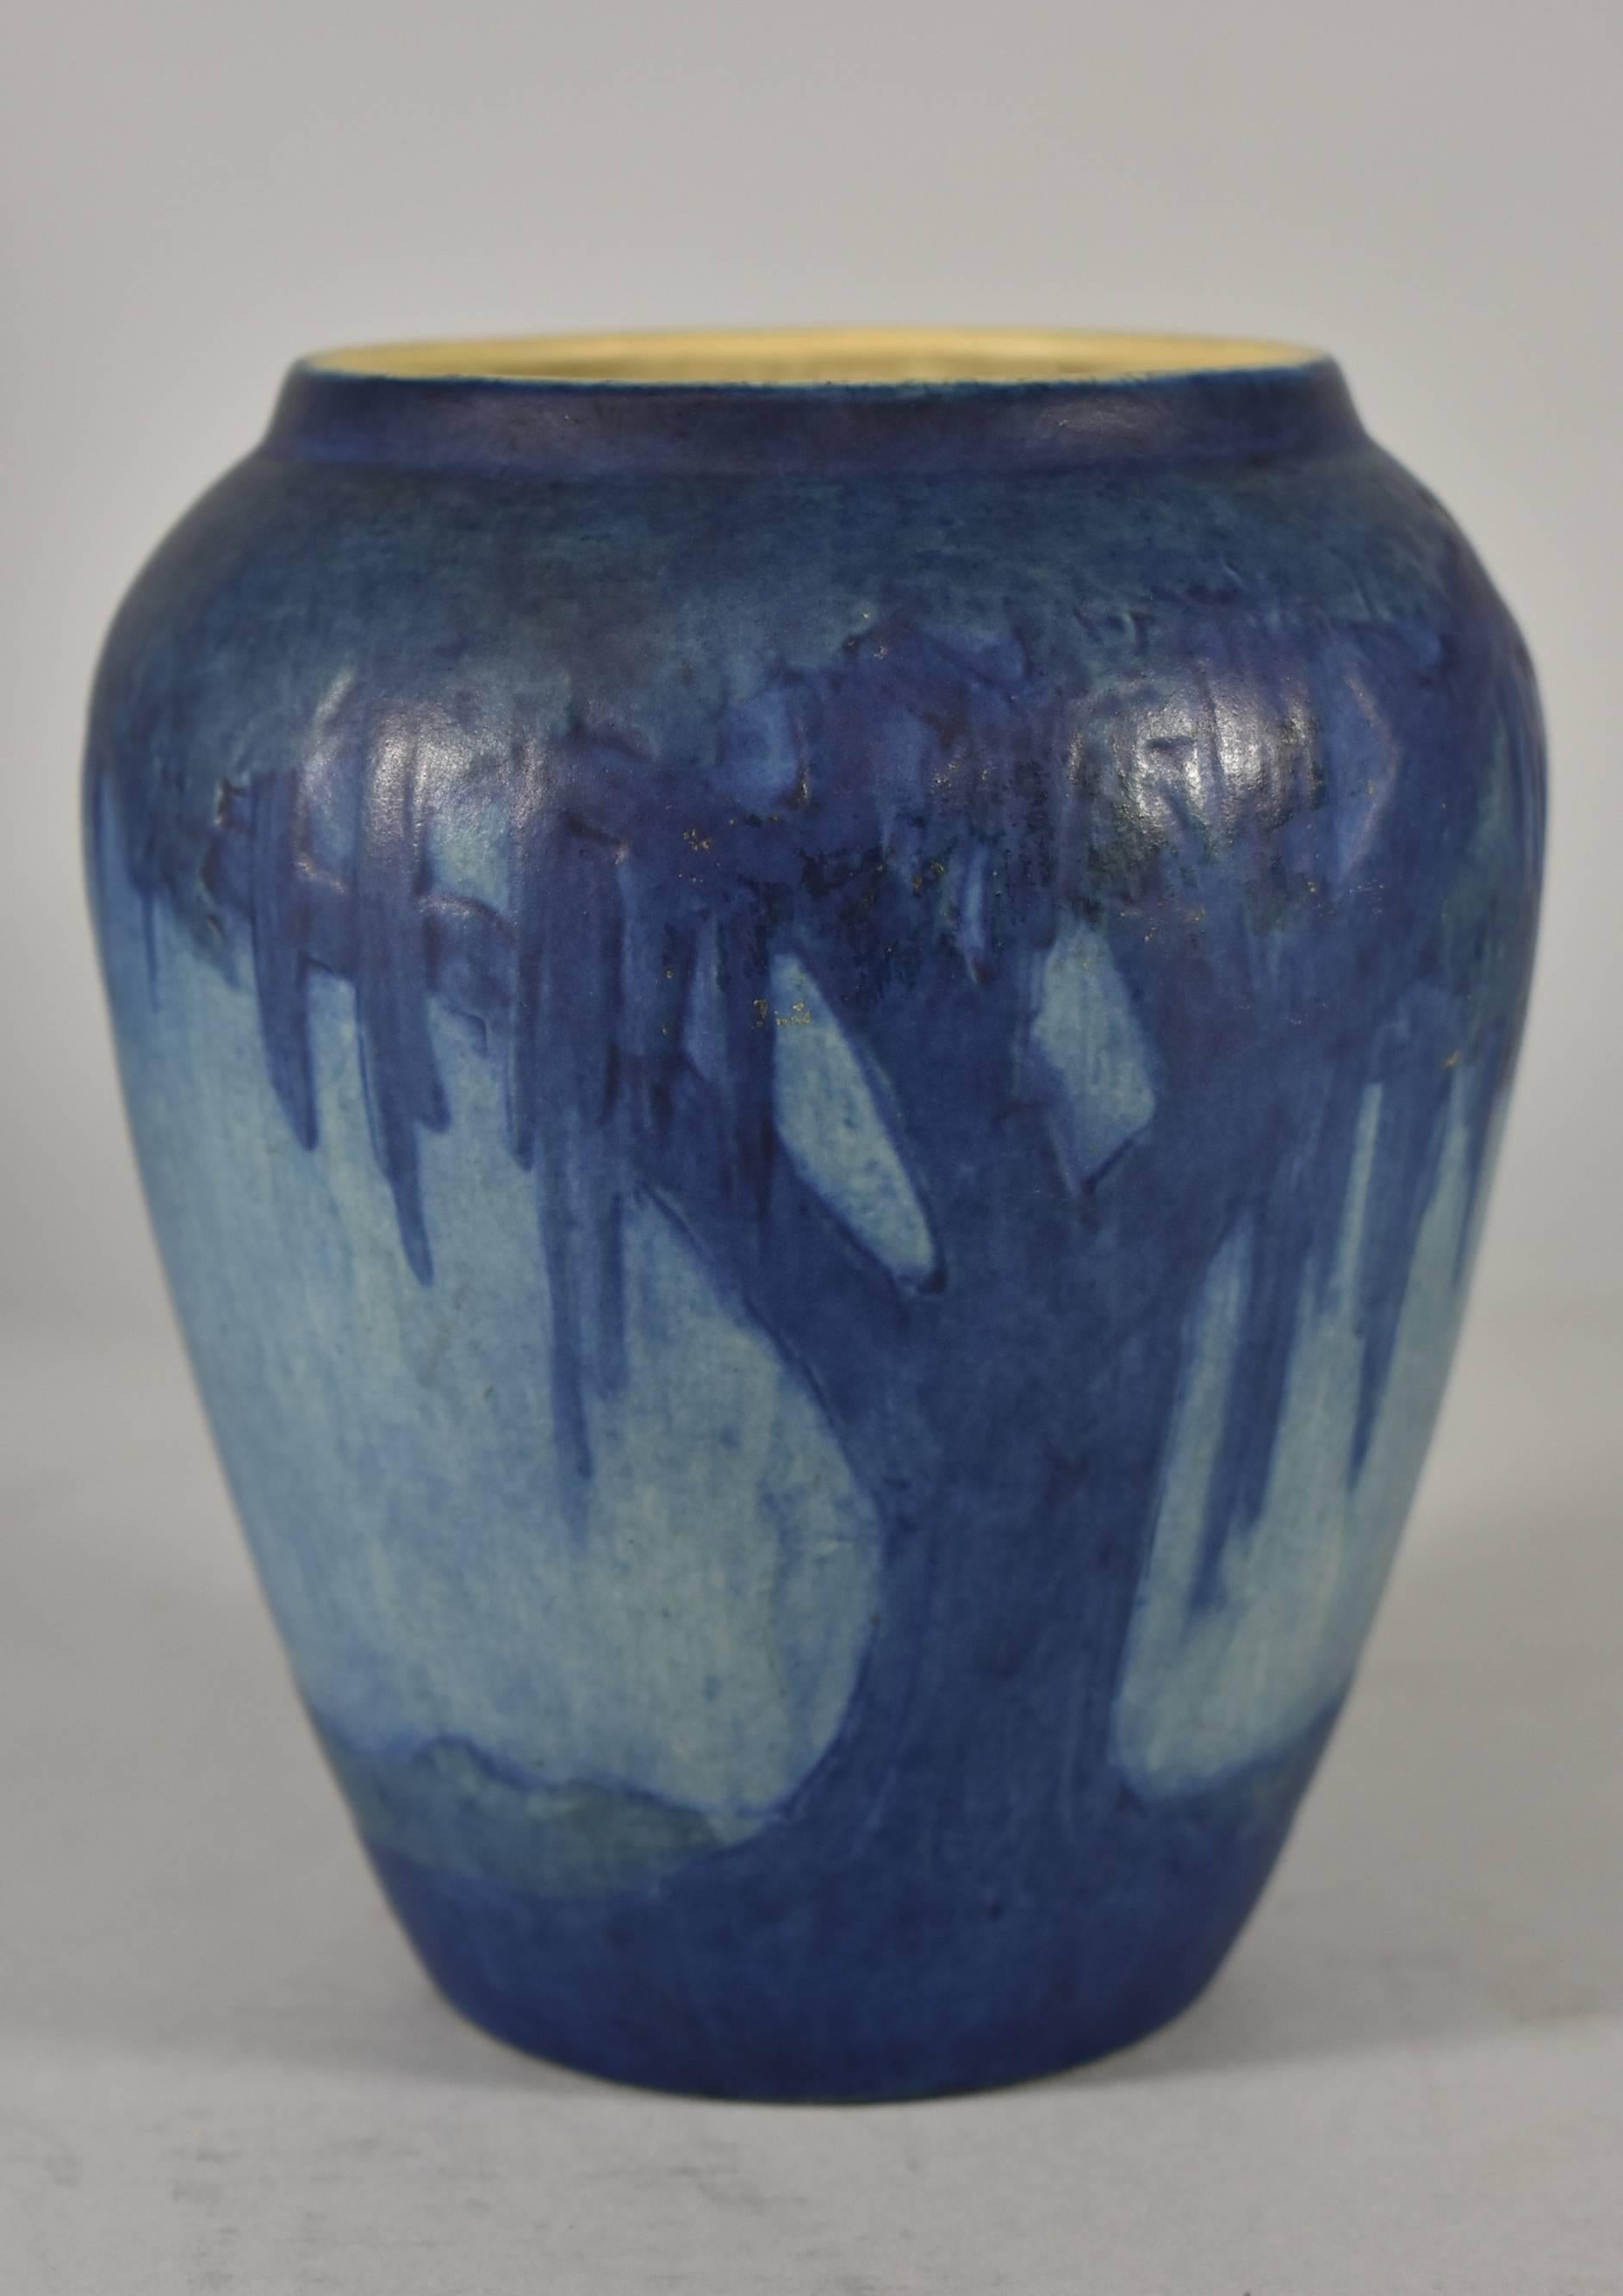 A beautiful, well executed Newcomb College vase. This vase is done in rich deep tones of blue with Spanish moss trees and a full moon. It is 6